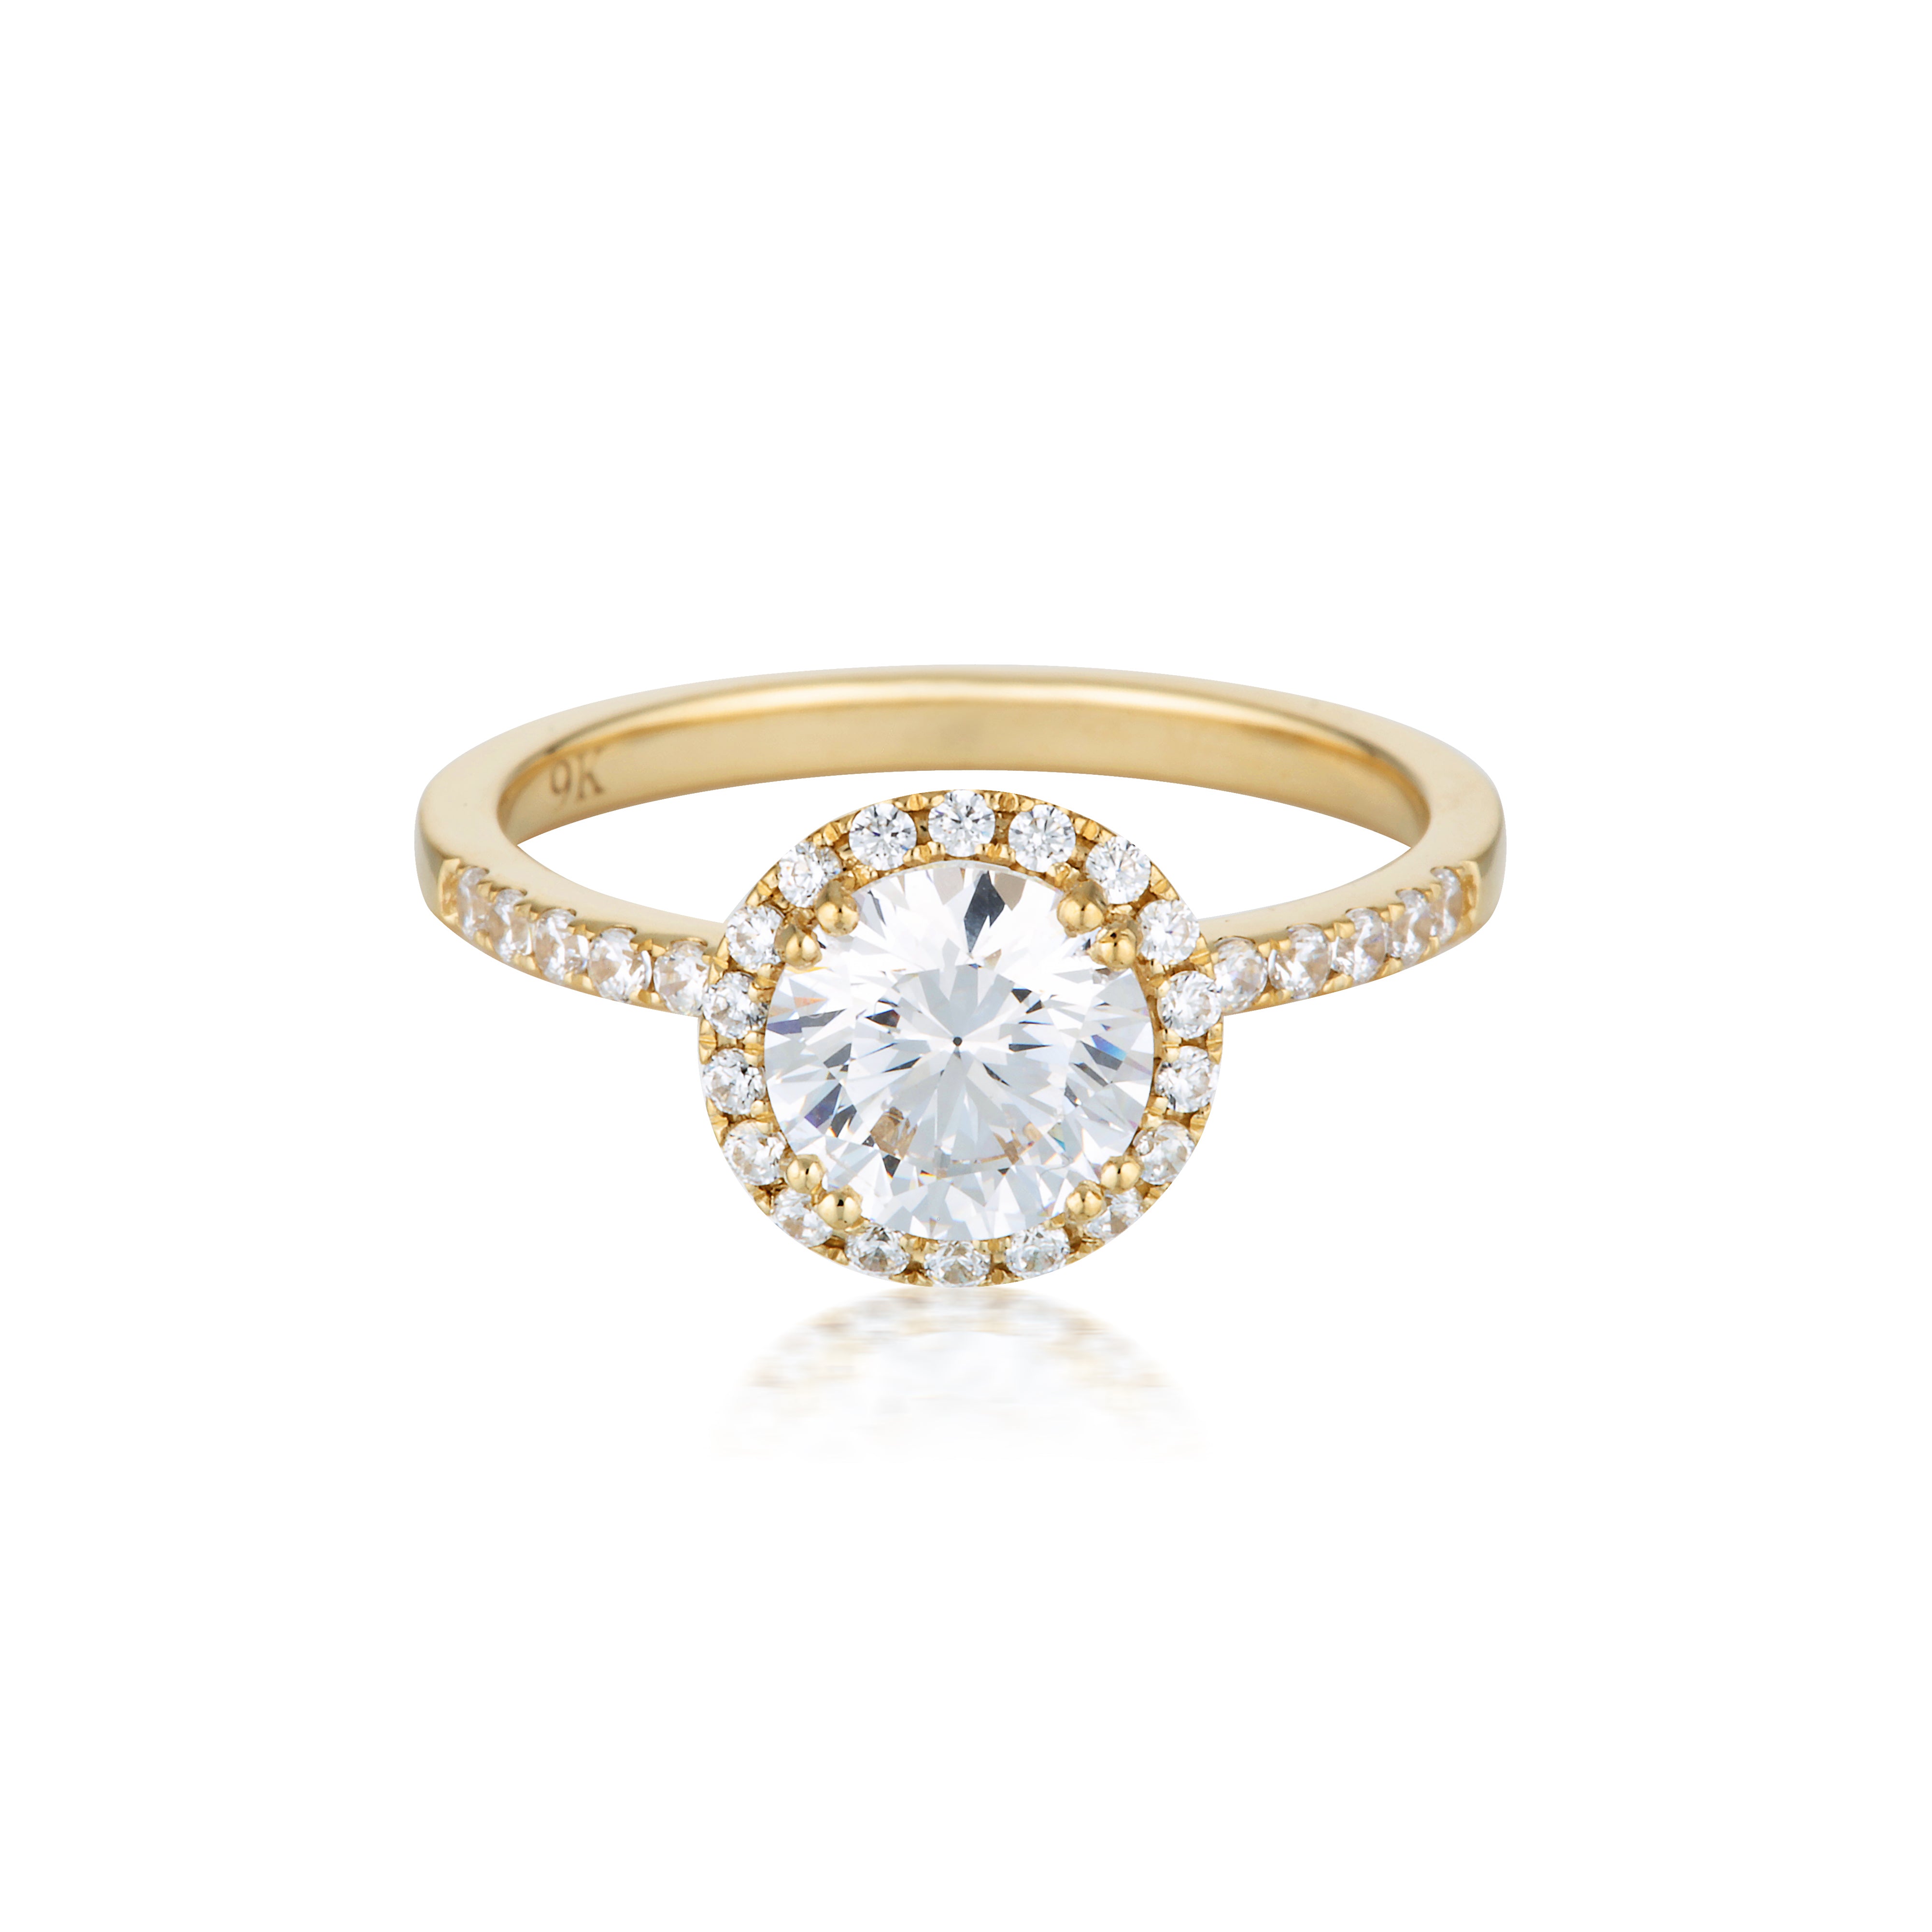 Georgini Gold Round Brilliant Cut 1.25tcw Moissanite Halo Engagement Ring in 9ct Yellow Gold